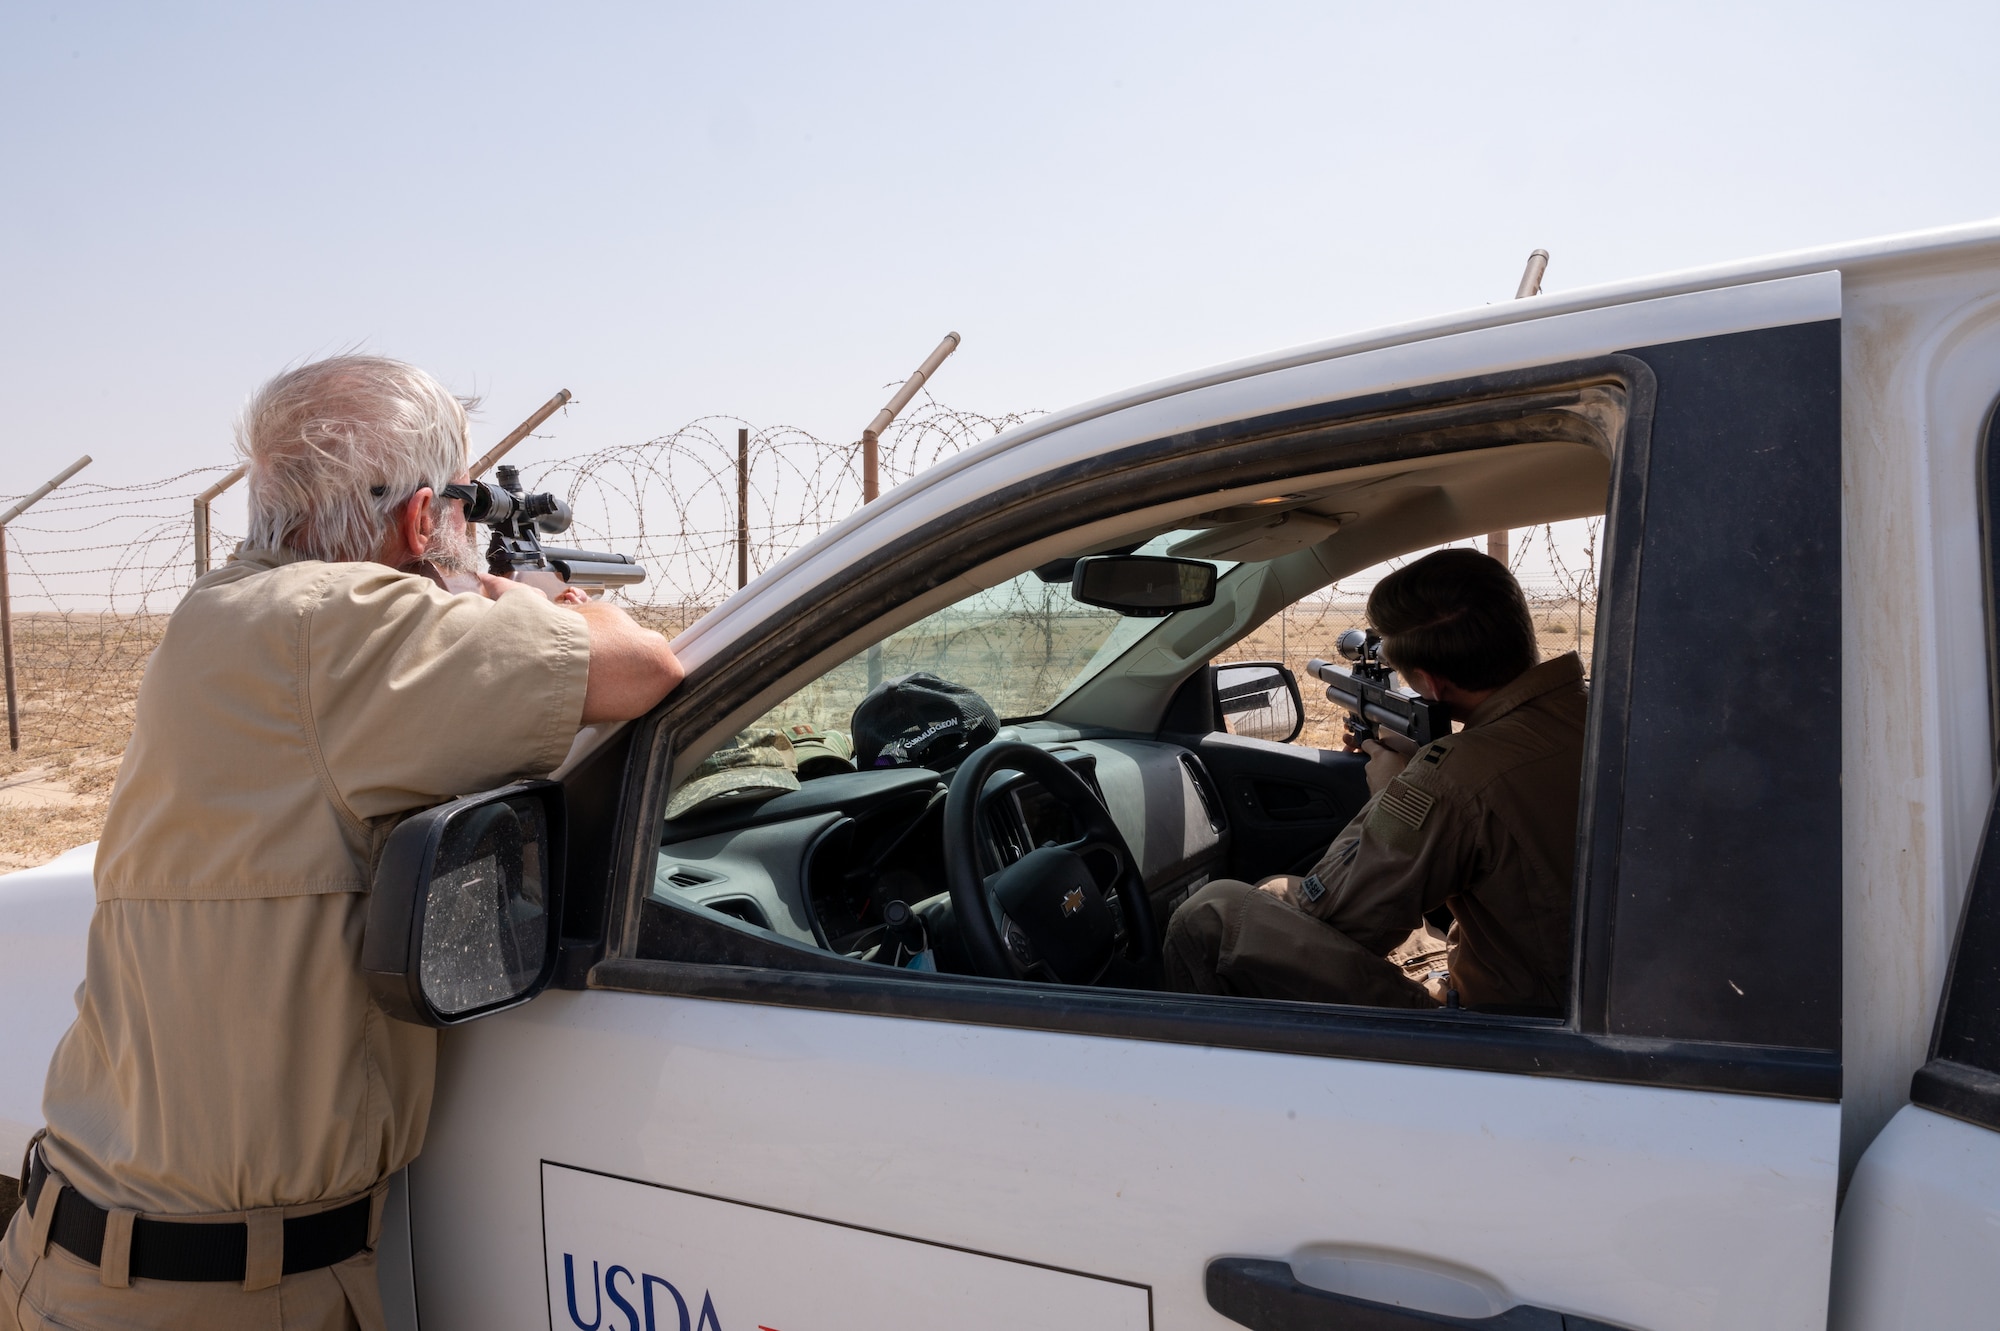 The 386th Air Expeditionary Wing Safety office works with the U.S. Department of Agriculture to depredate wildlife that poses a risk to aircraft, under the Bird/wildlife Aircraft Strike Hazard program.  The USDA are hired as subject matter experts on wildlife population and habitat management.